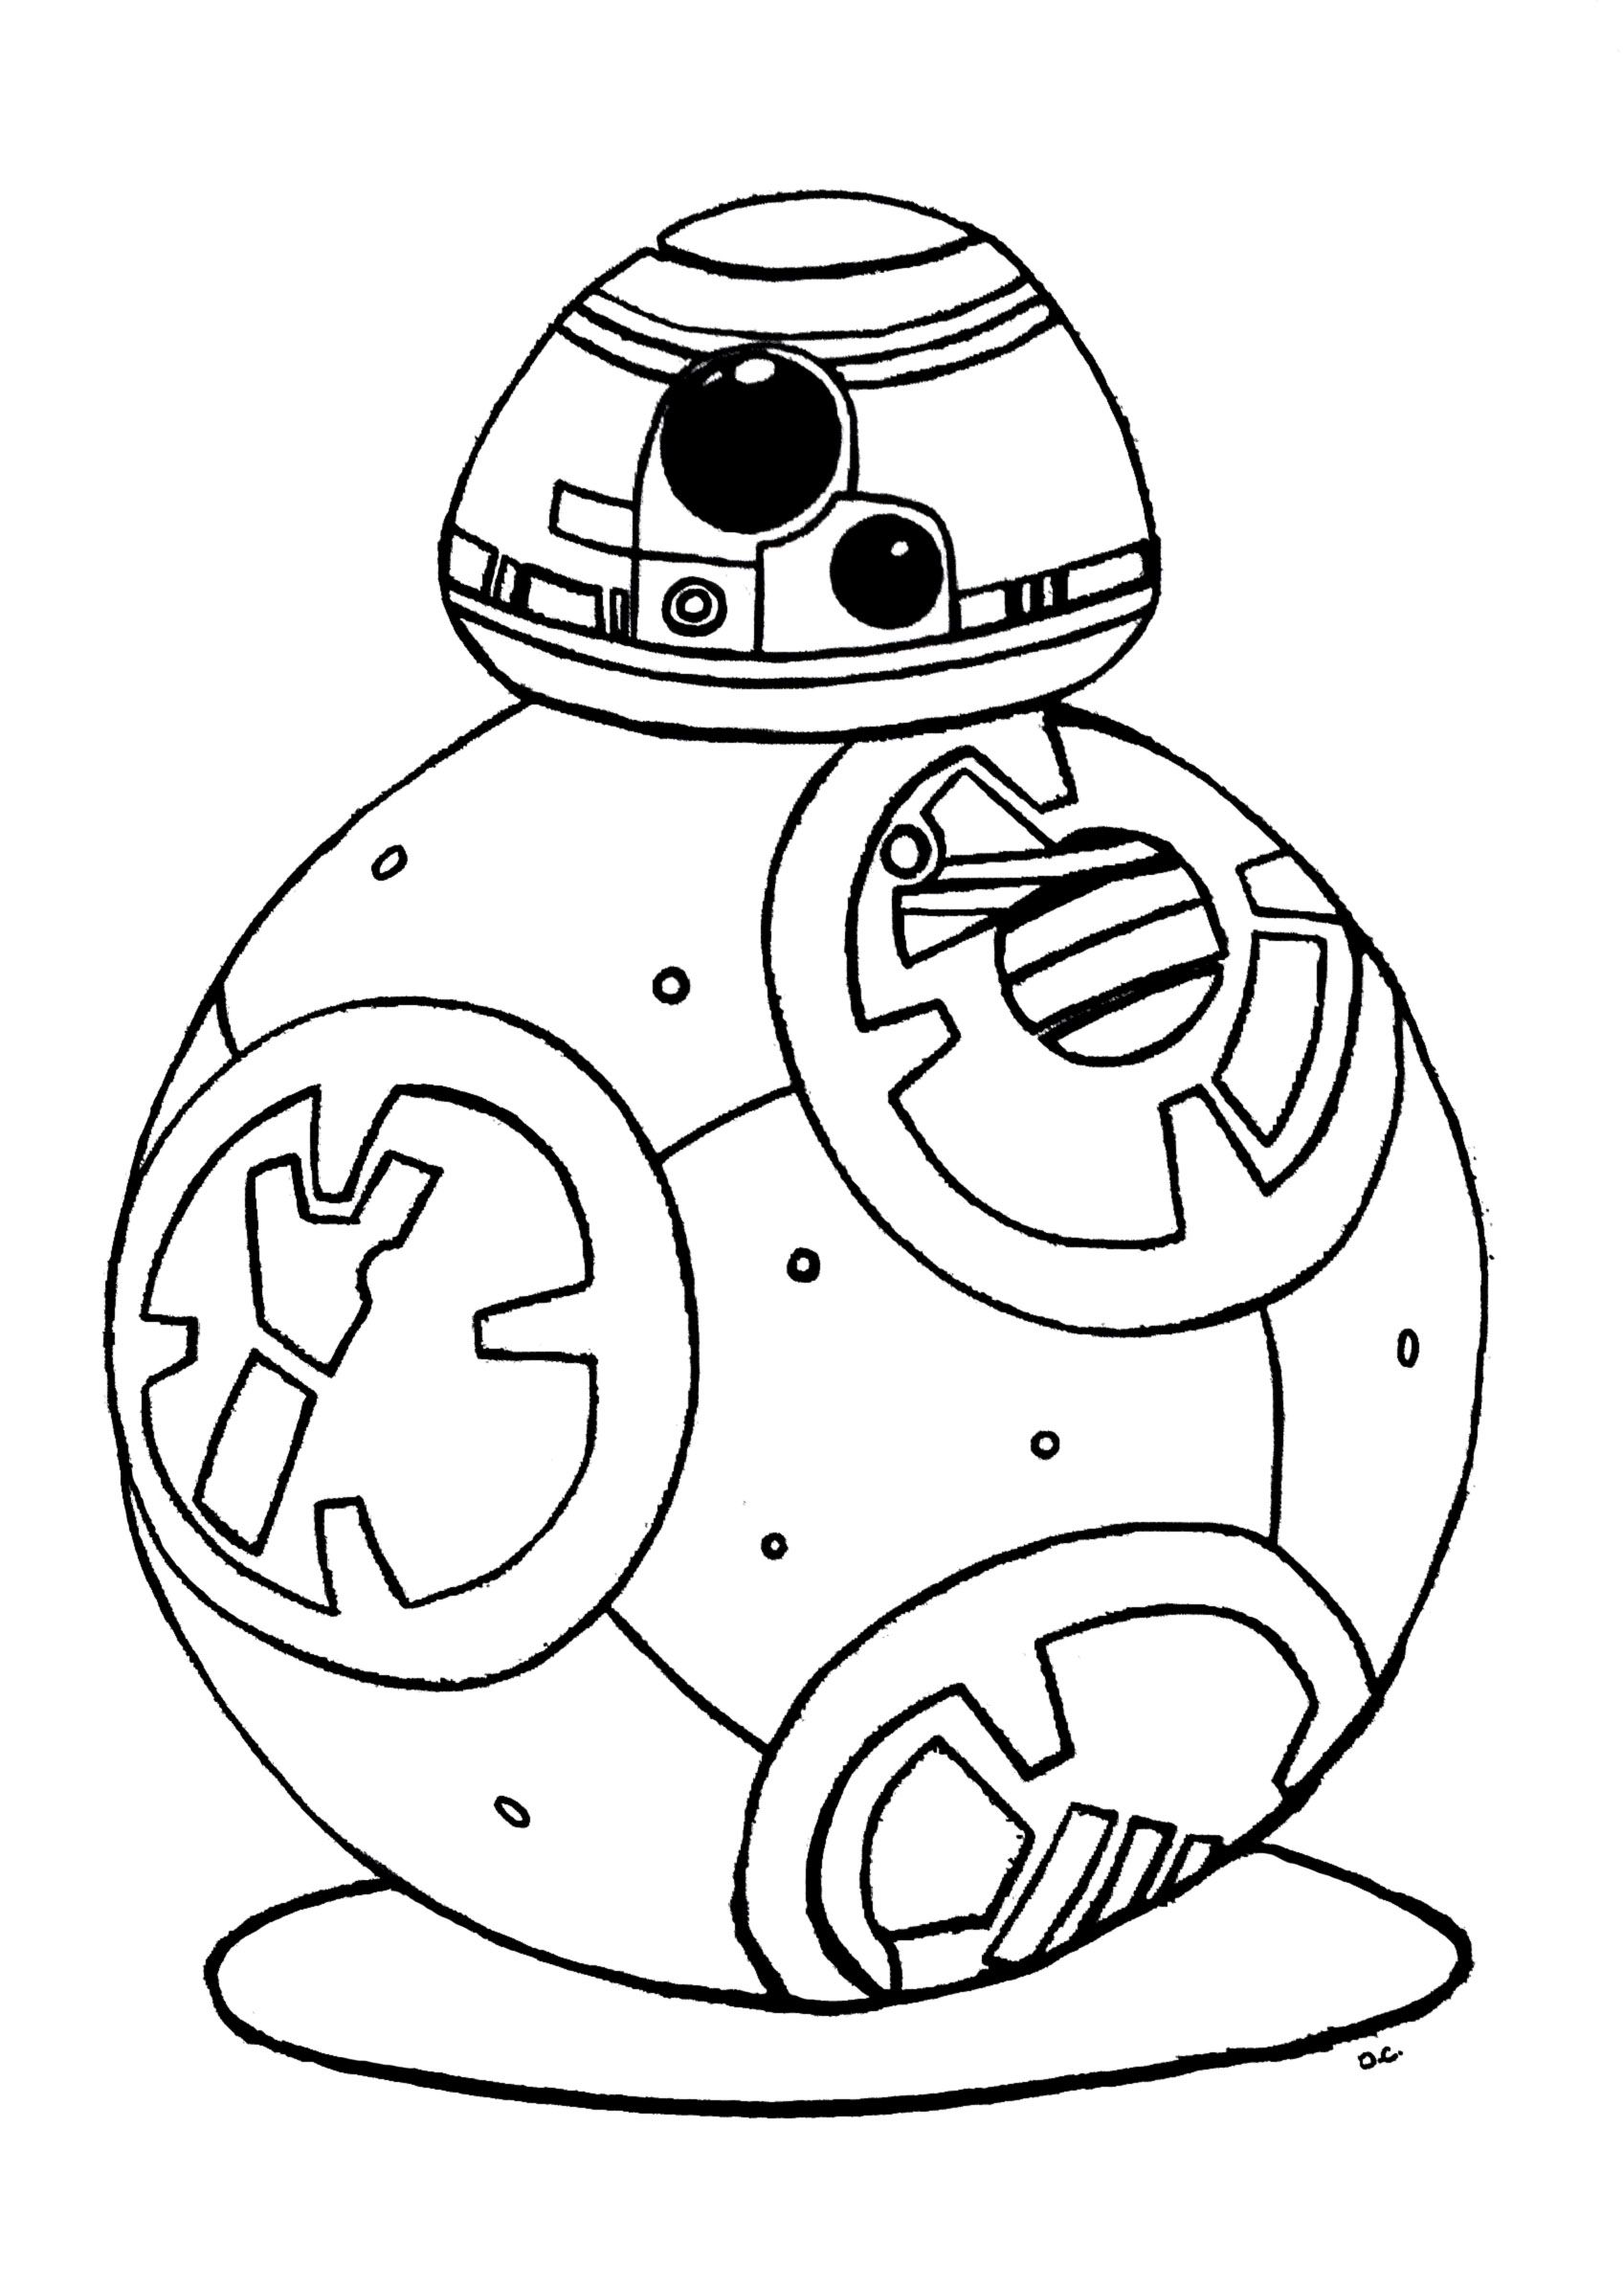 Star wars coloring pages - Coloring for kids : coloring-bb-8-star ...